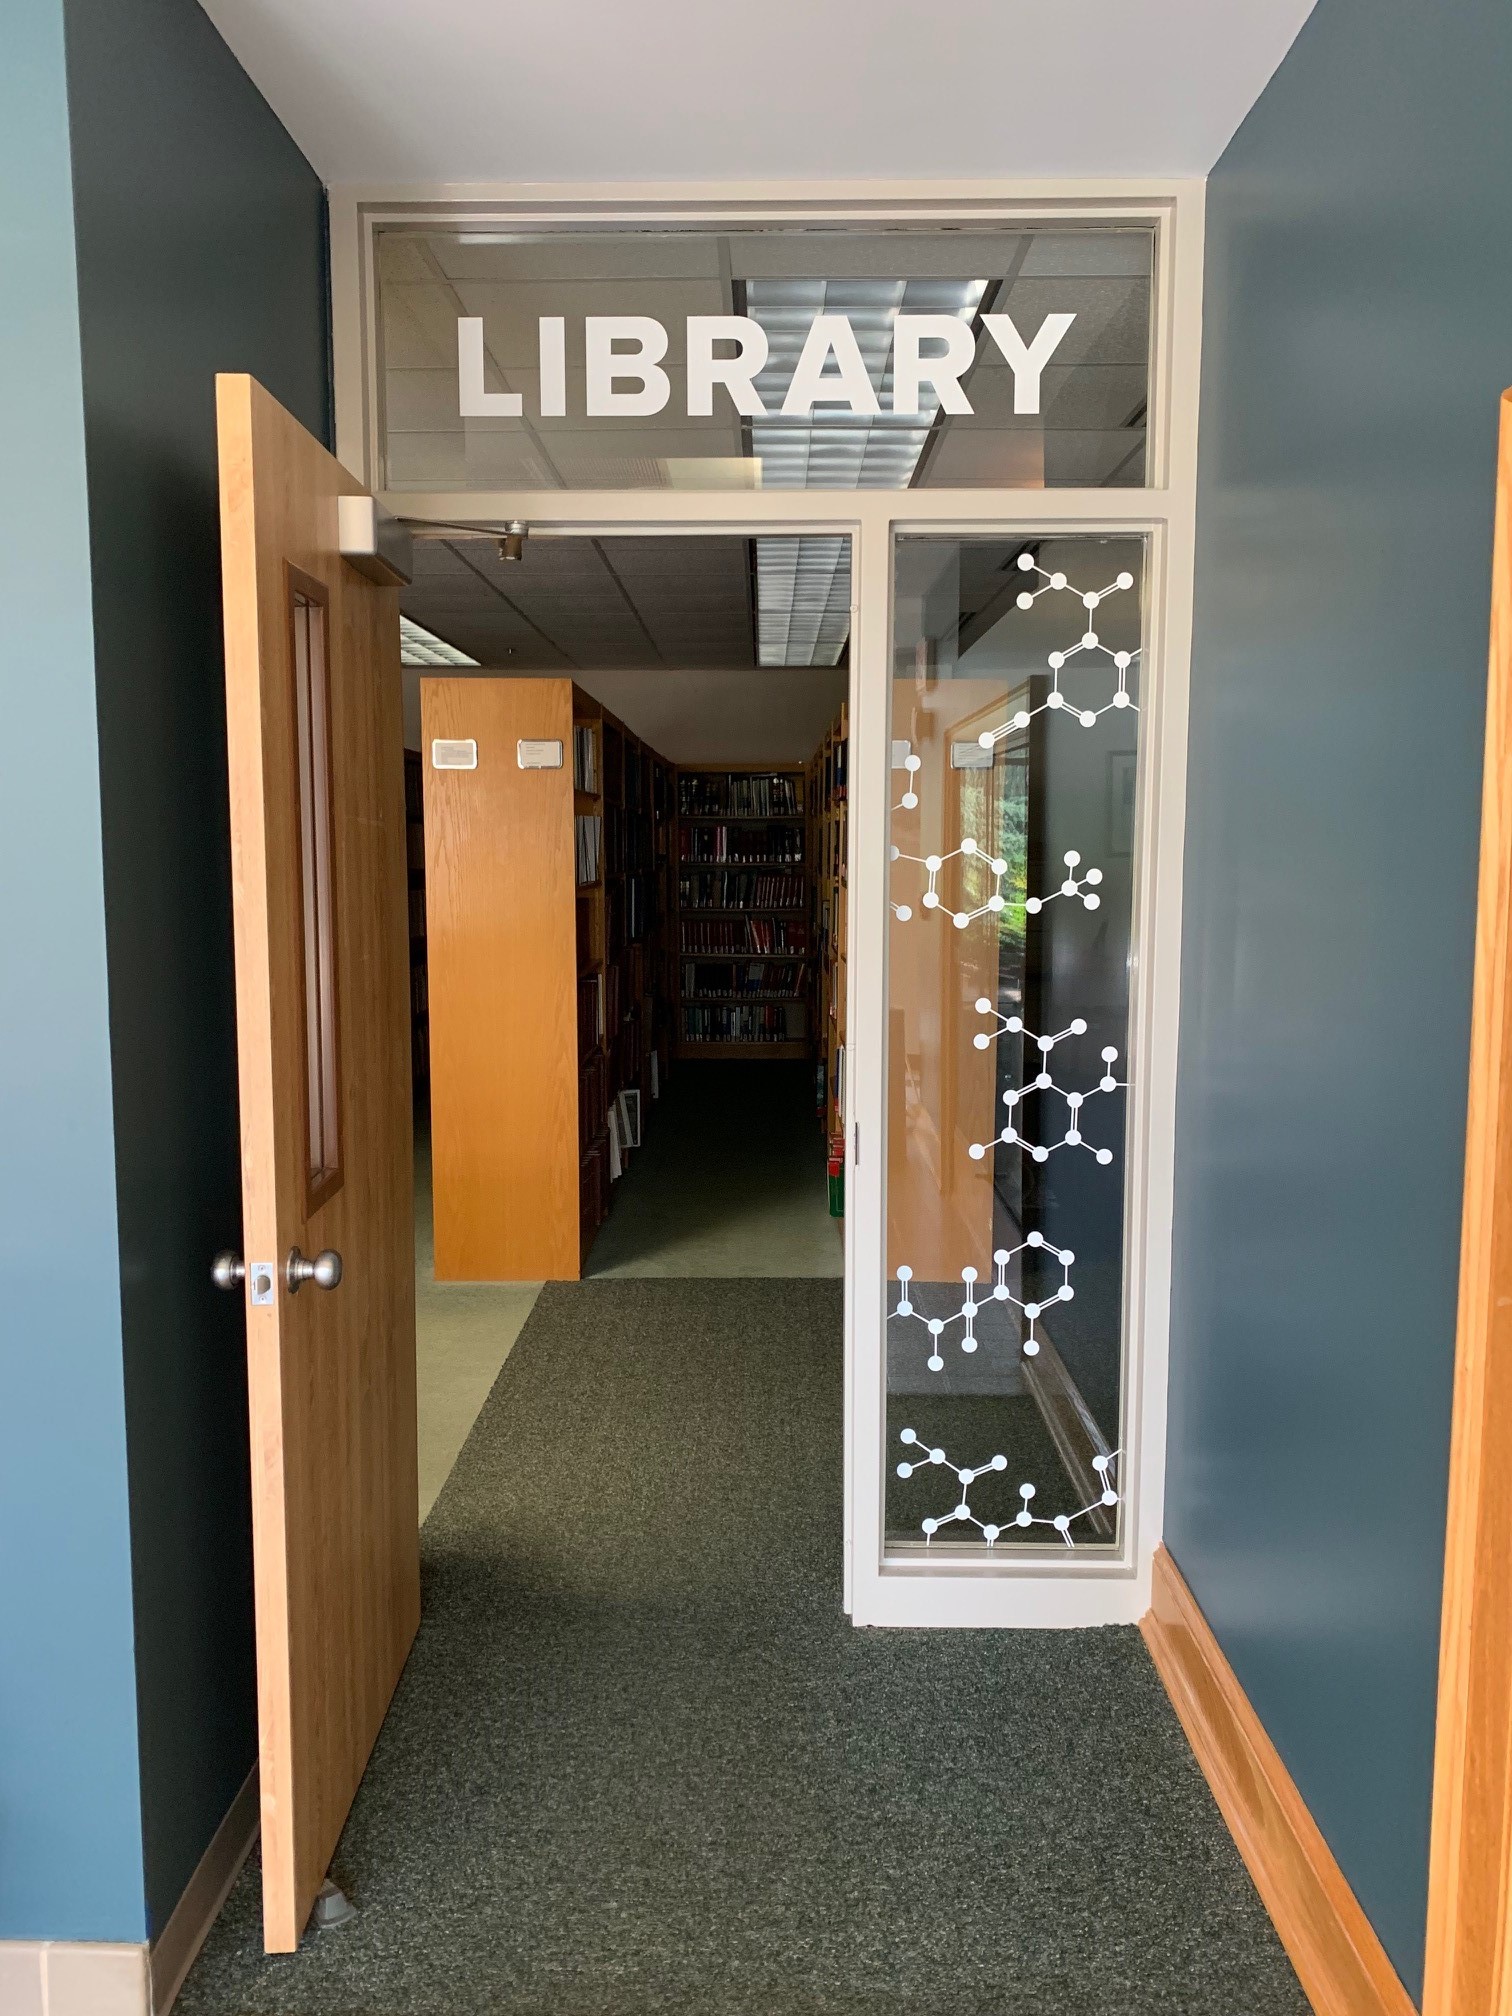 Library window decal